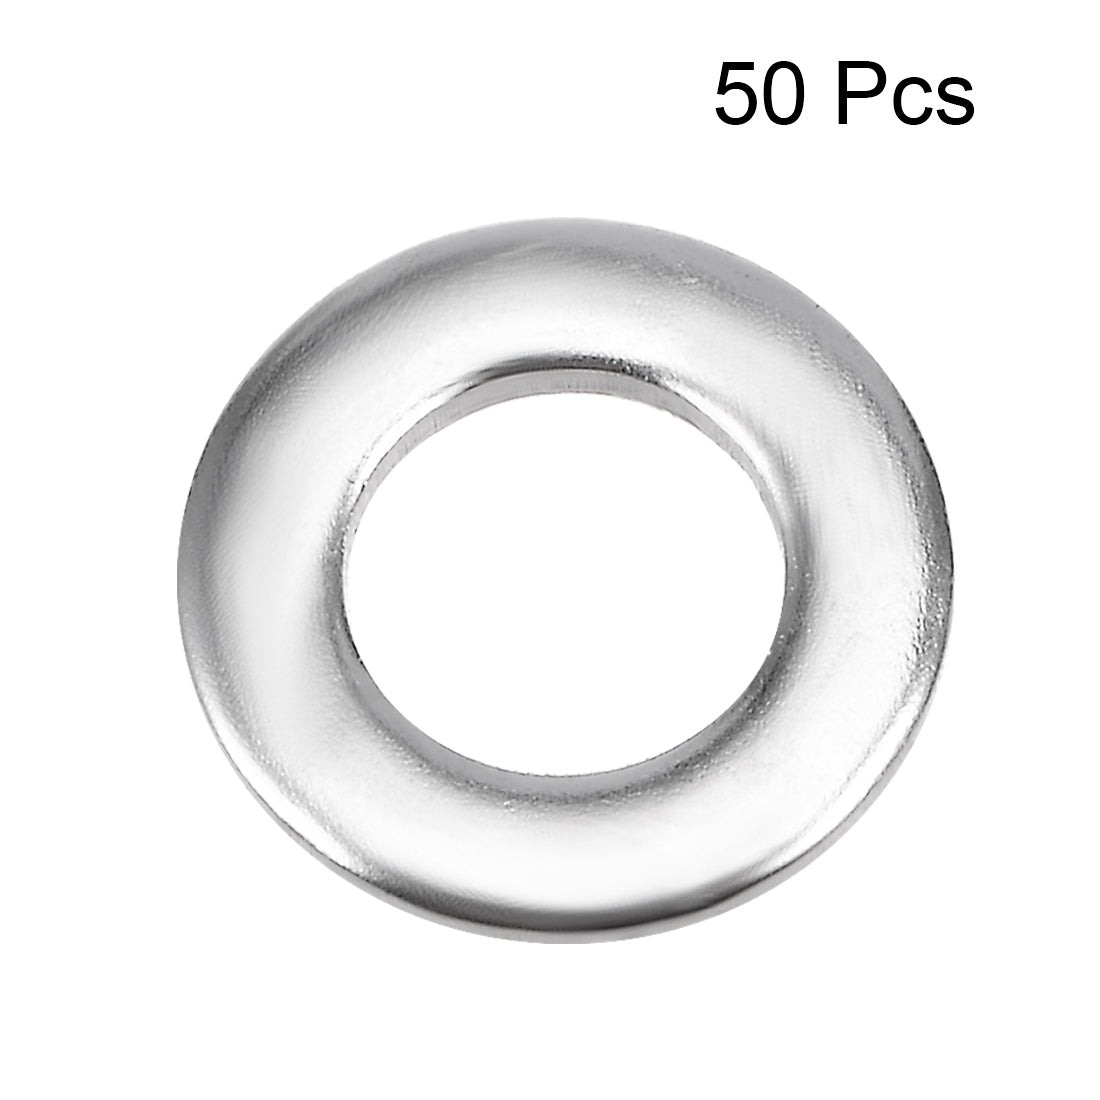 uxcell Uxcell 50 Pcs 4mm x 8mm x 0.9mm 304 Stainless Steel Flat Washer for Screw Bolt